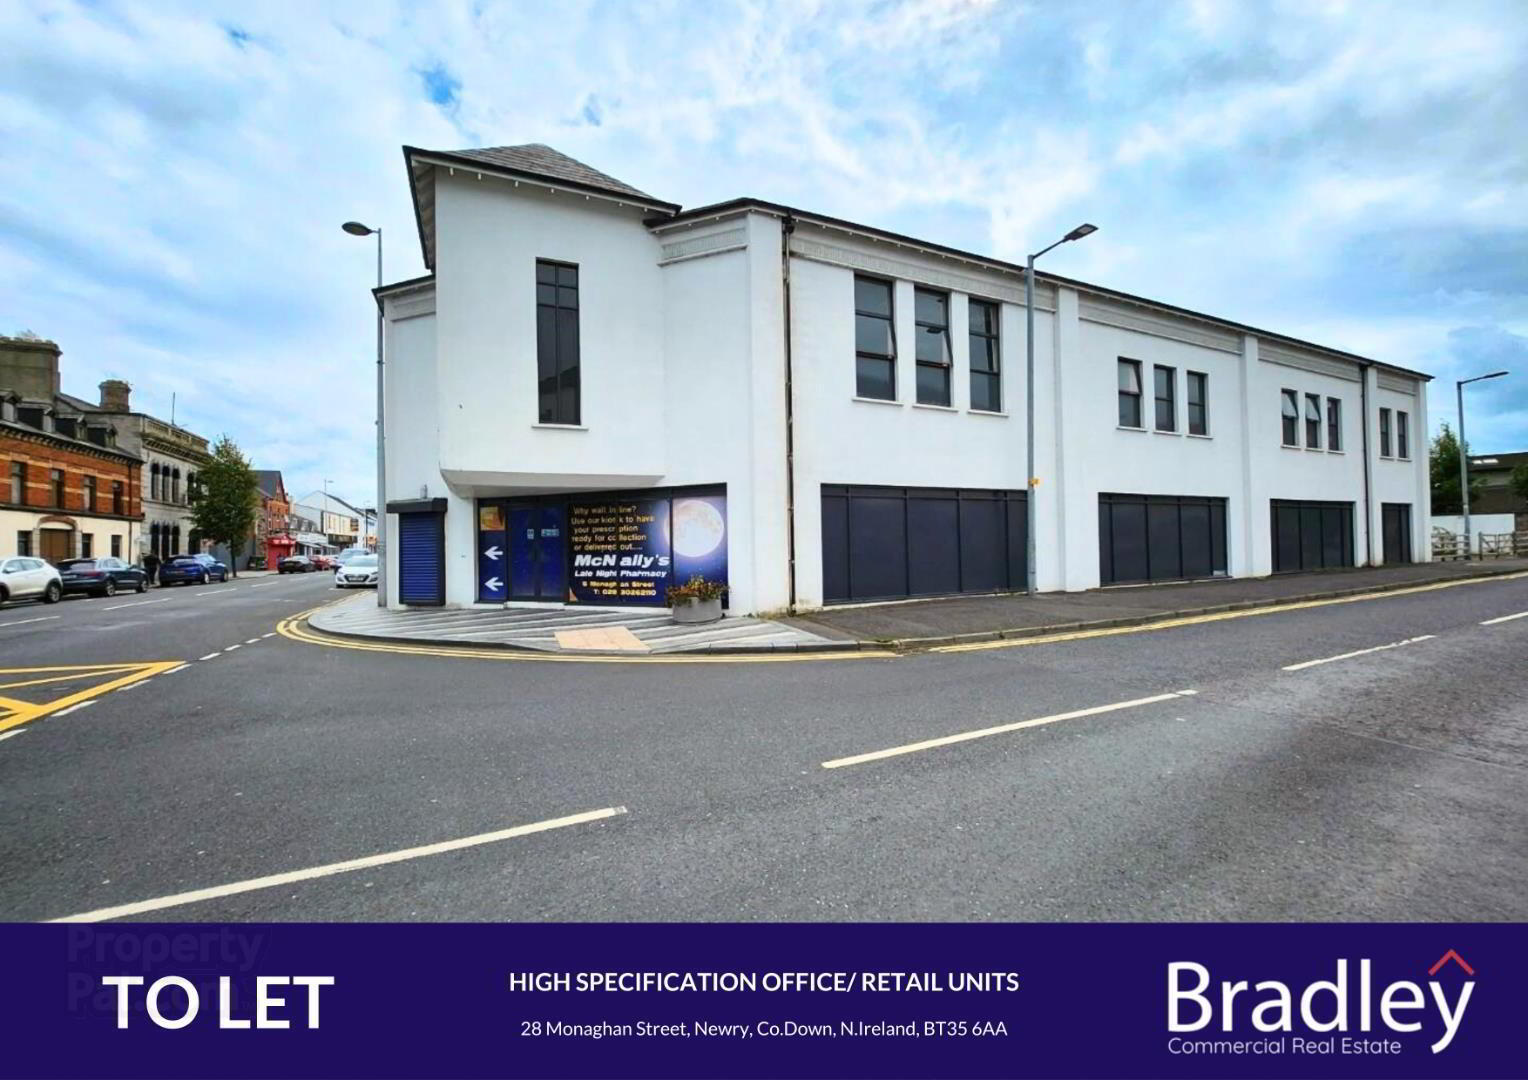 HIGH SPECIFICATION OFFICE/ RETAIL UNITS, 28 Monaghan Street